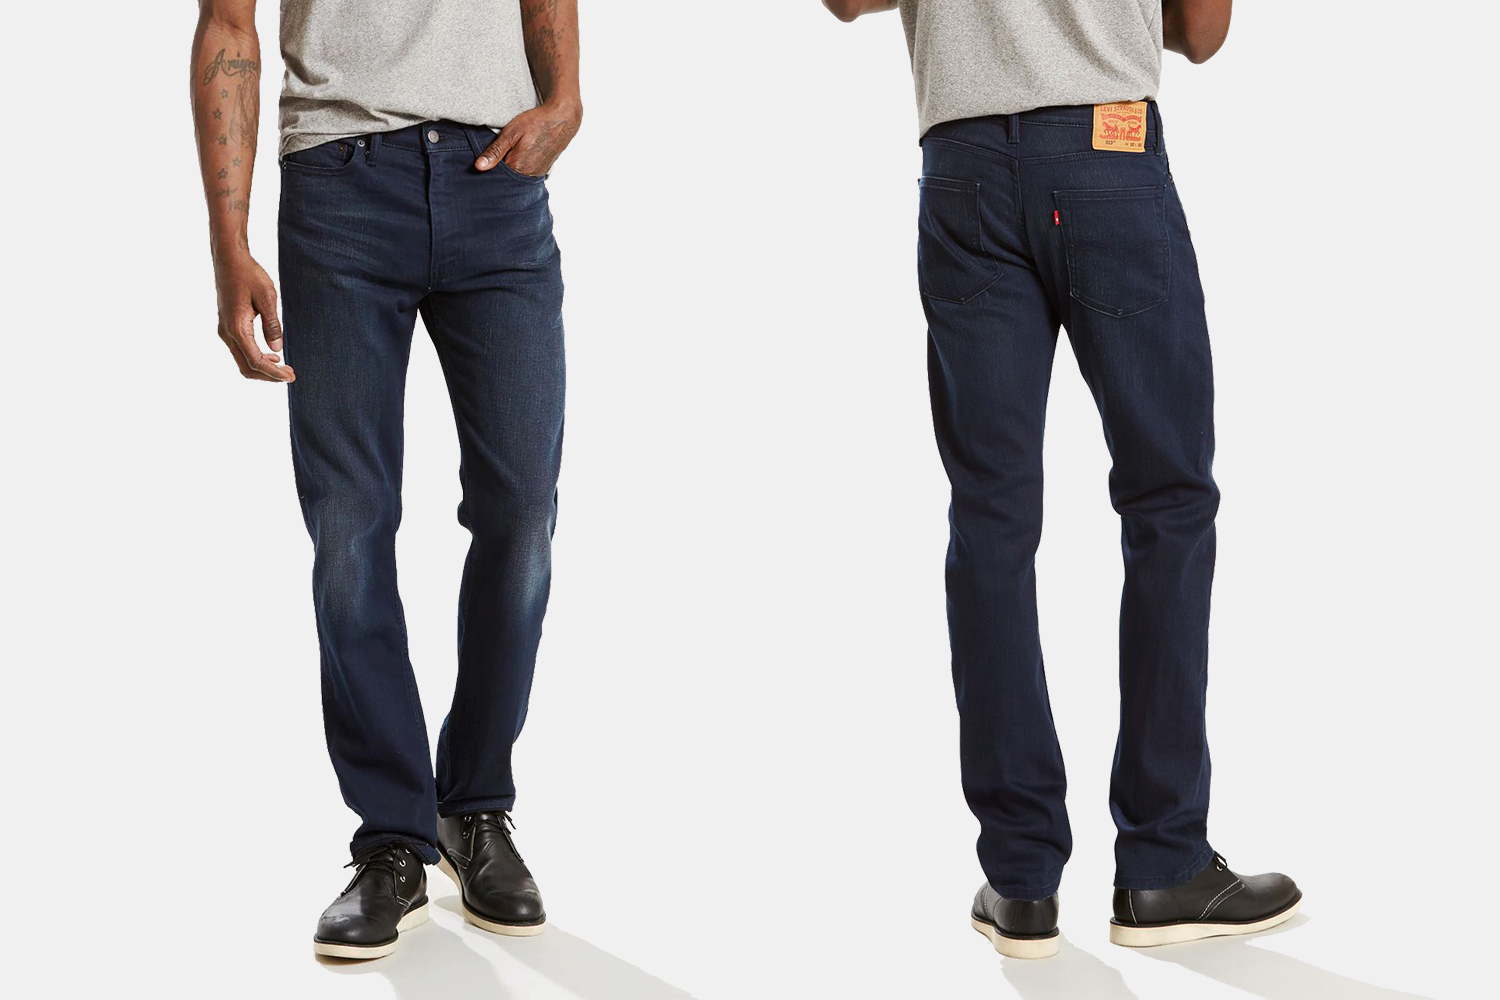 Levi's Is Back With a $20 Jeans Sale for Summer - InsideHook